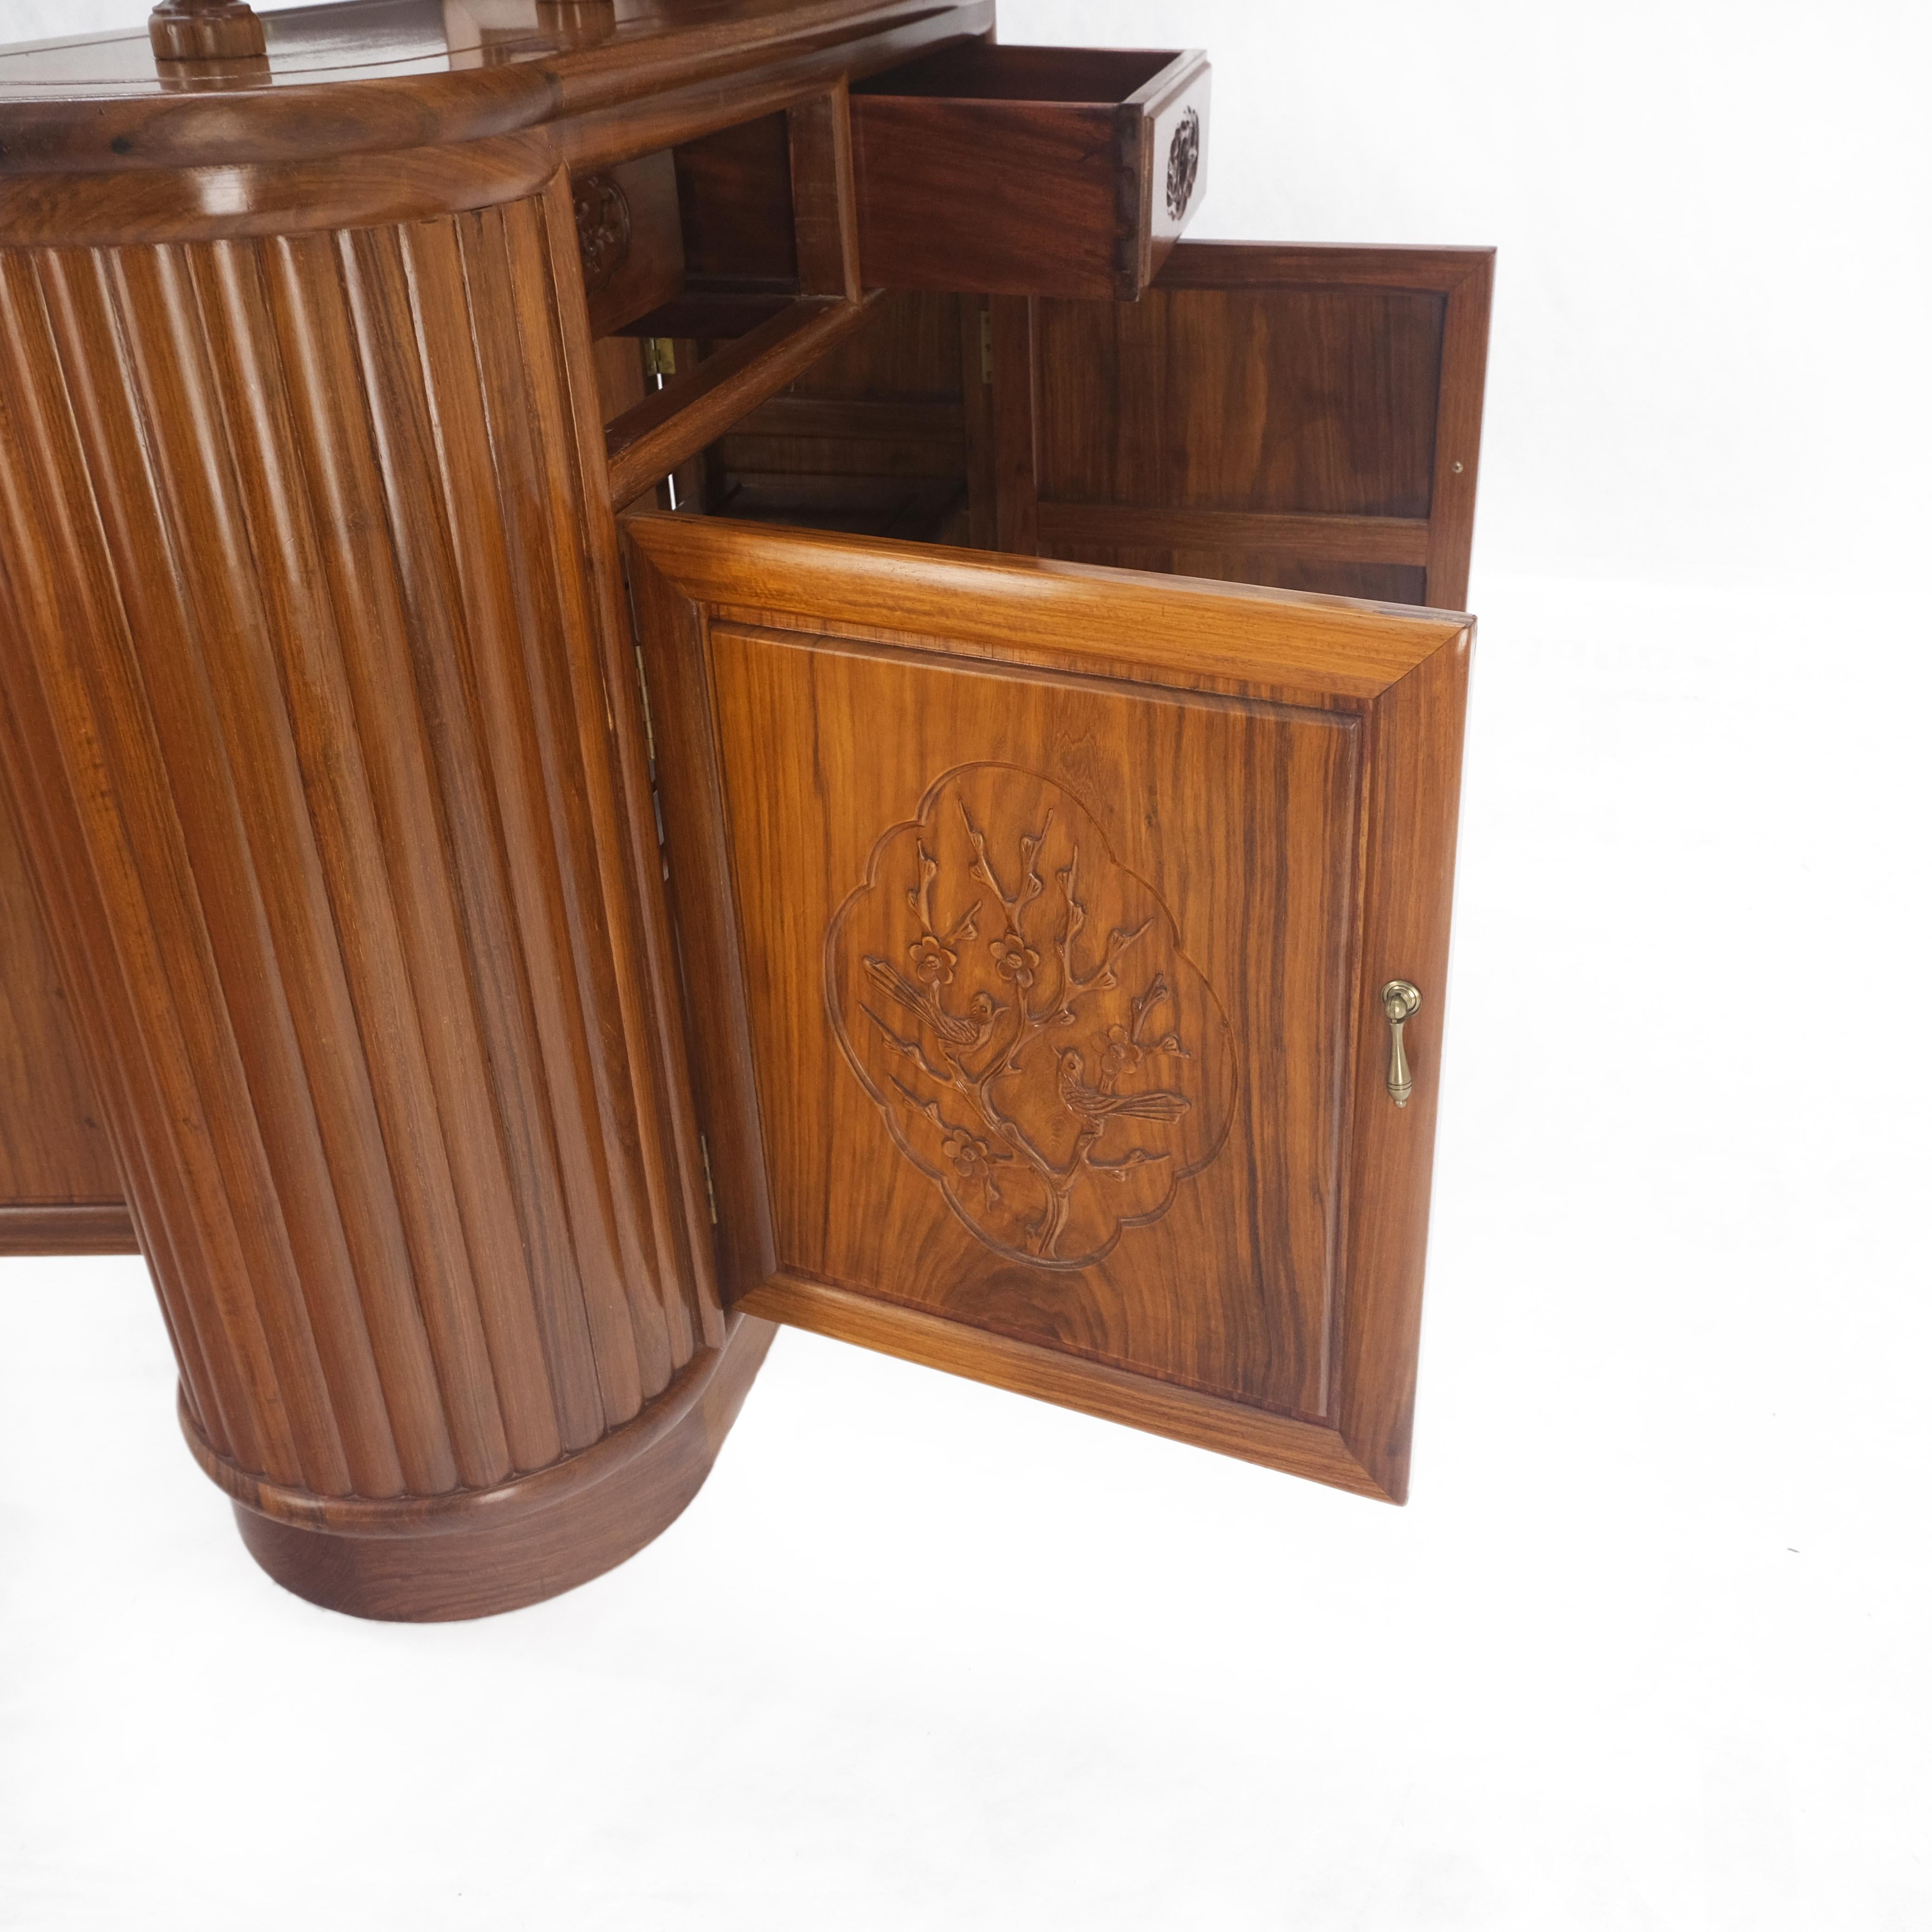 Carved Solid Teak Center Cabinet Room Divider Console Bookcase Shelves Lights Mint!.
Unique decorative cabinet offering plenty of storage accessible on both sides. Perfect piece for breaking up space, room divider with a purpose - display curio